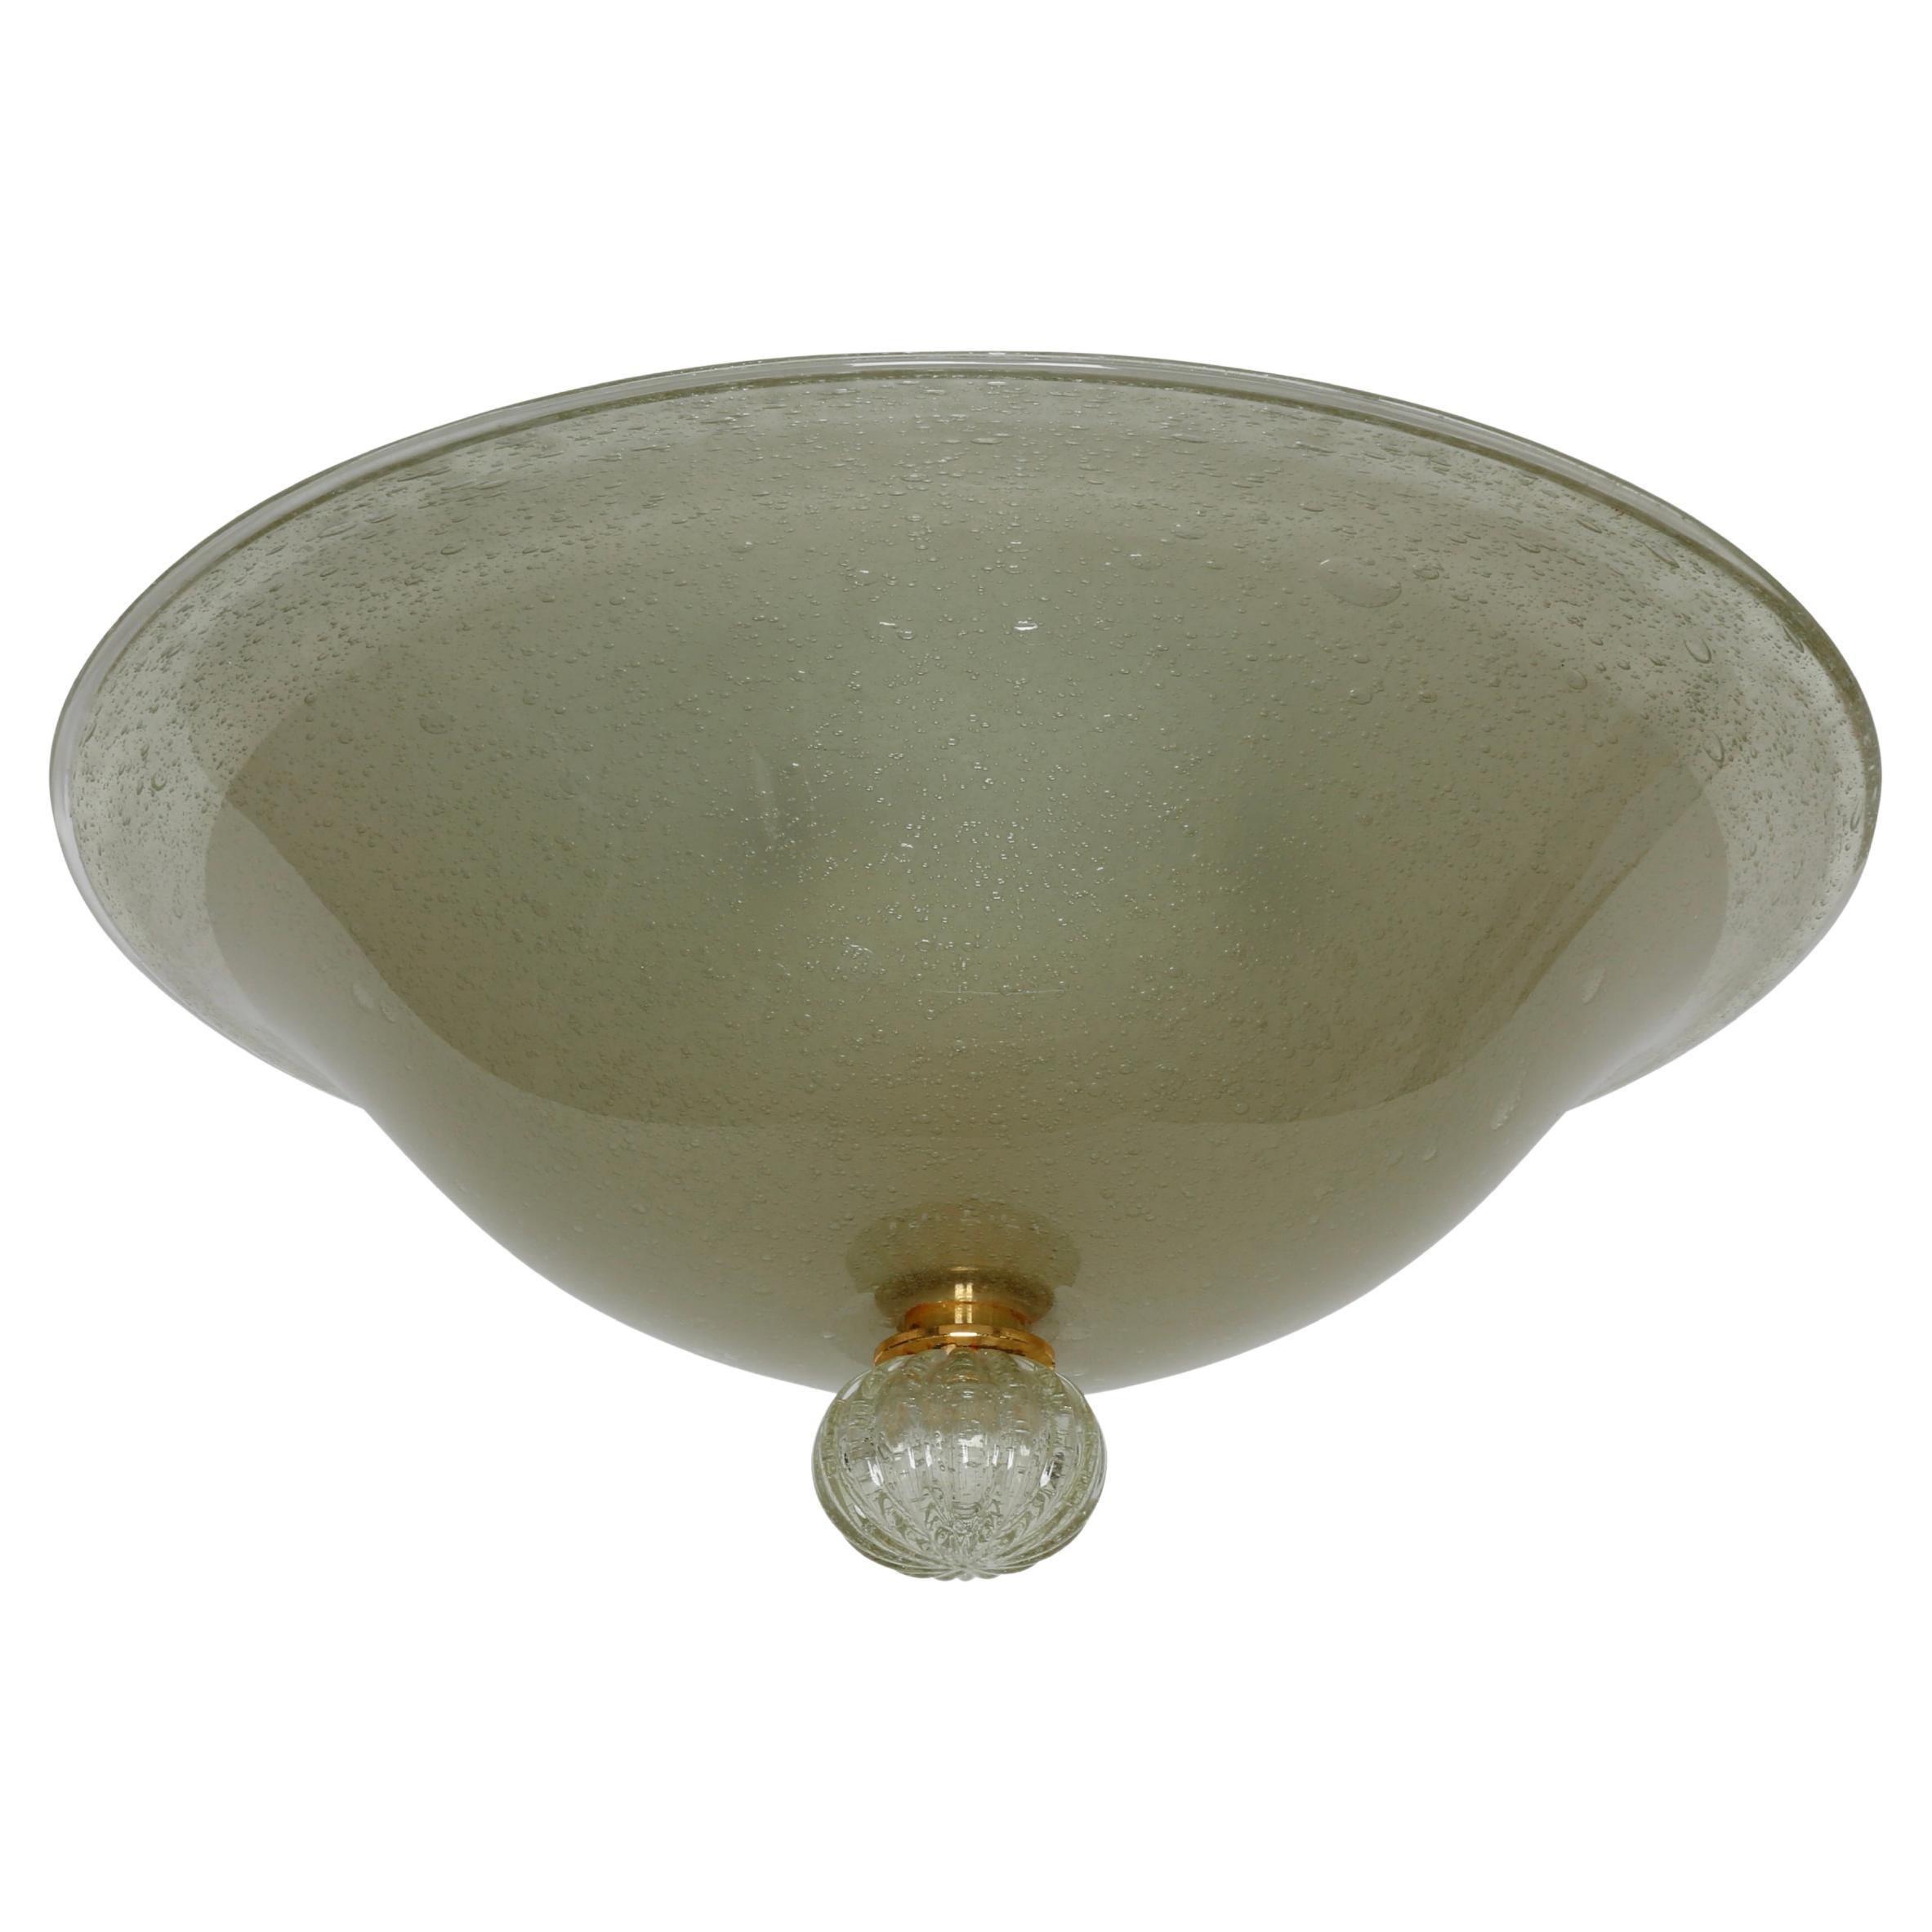 Murano Flush Mount Ceiling Light by Barovier & Toso, large For Sale